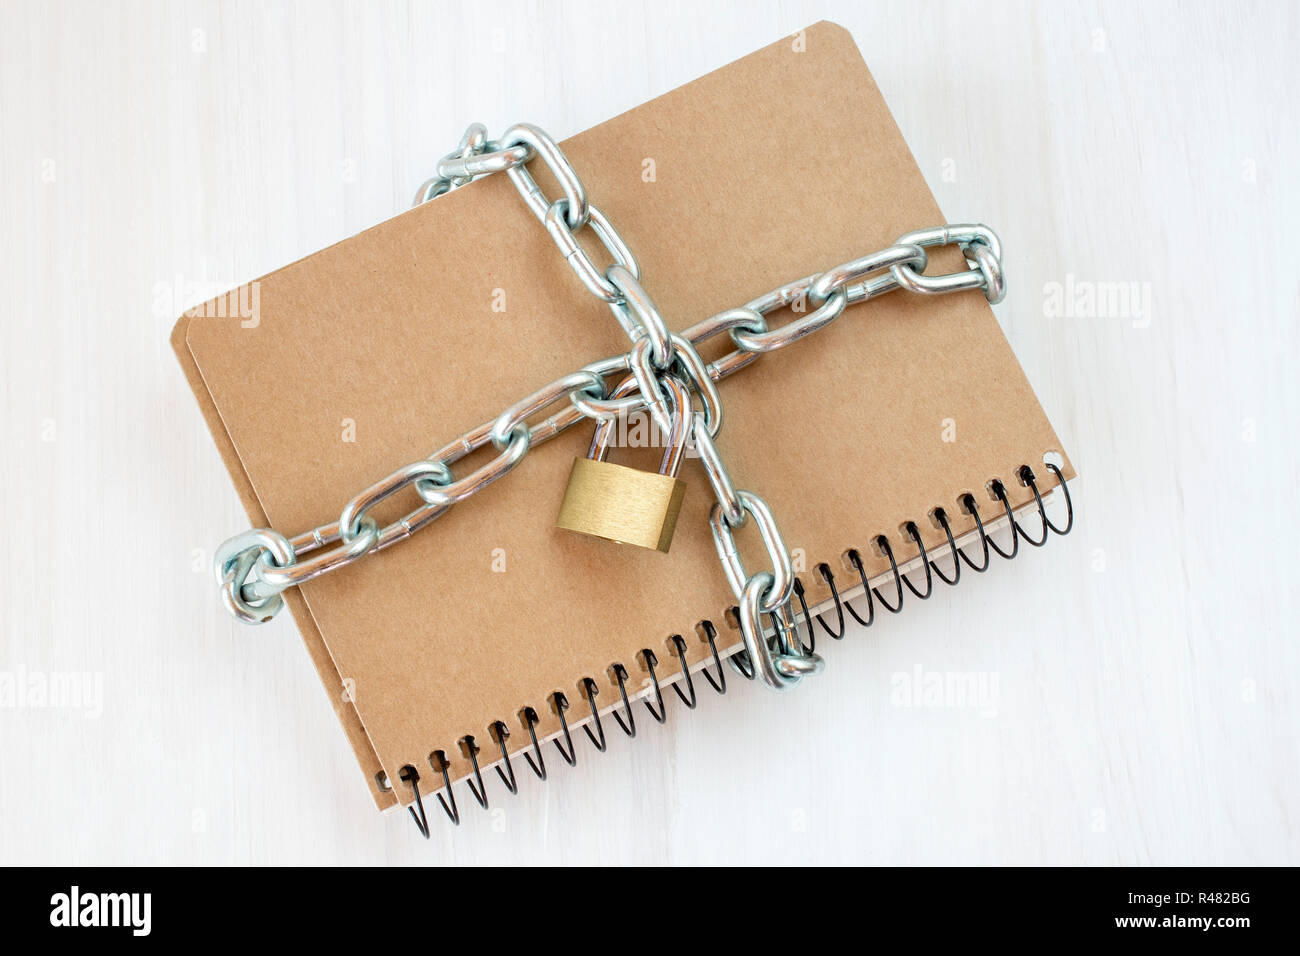 Censorship concept with book and chains Stock Photo